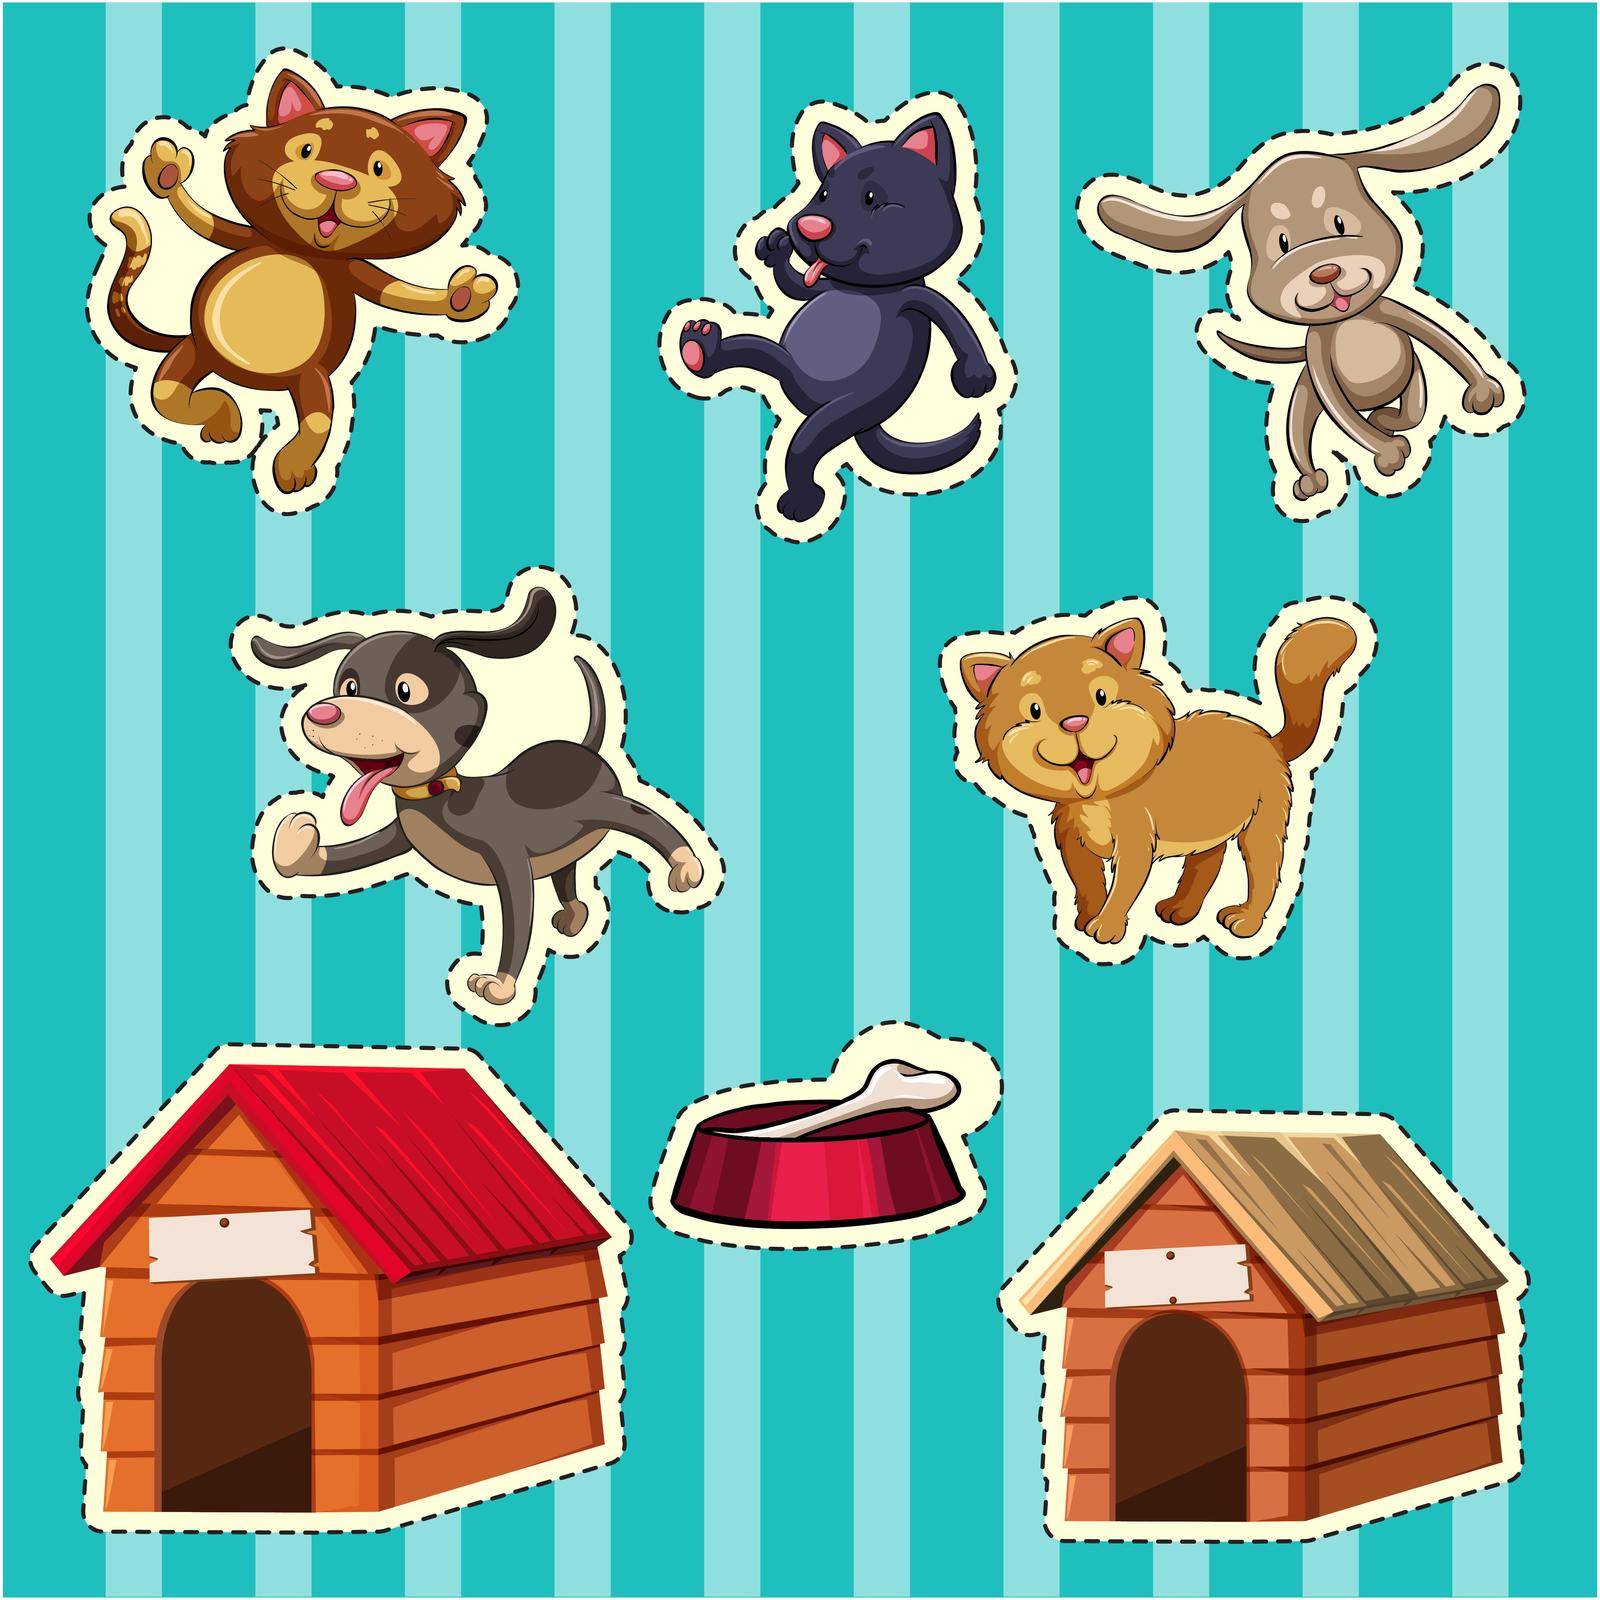 Sticker design for dogs and cats illustration